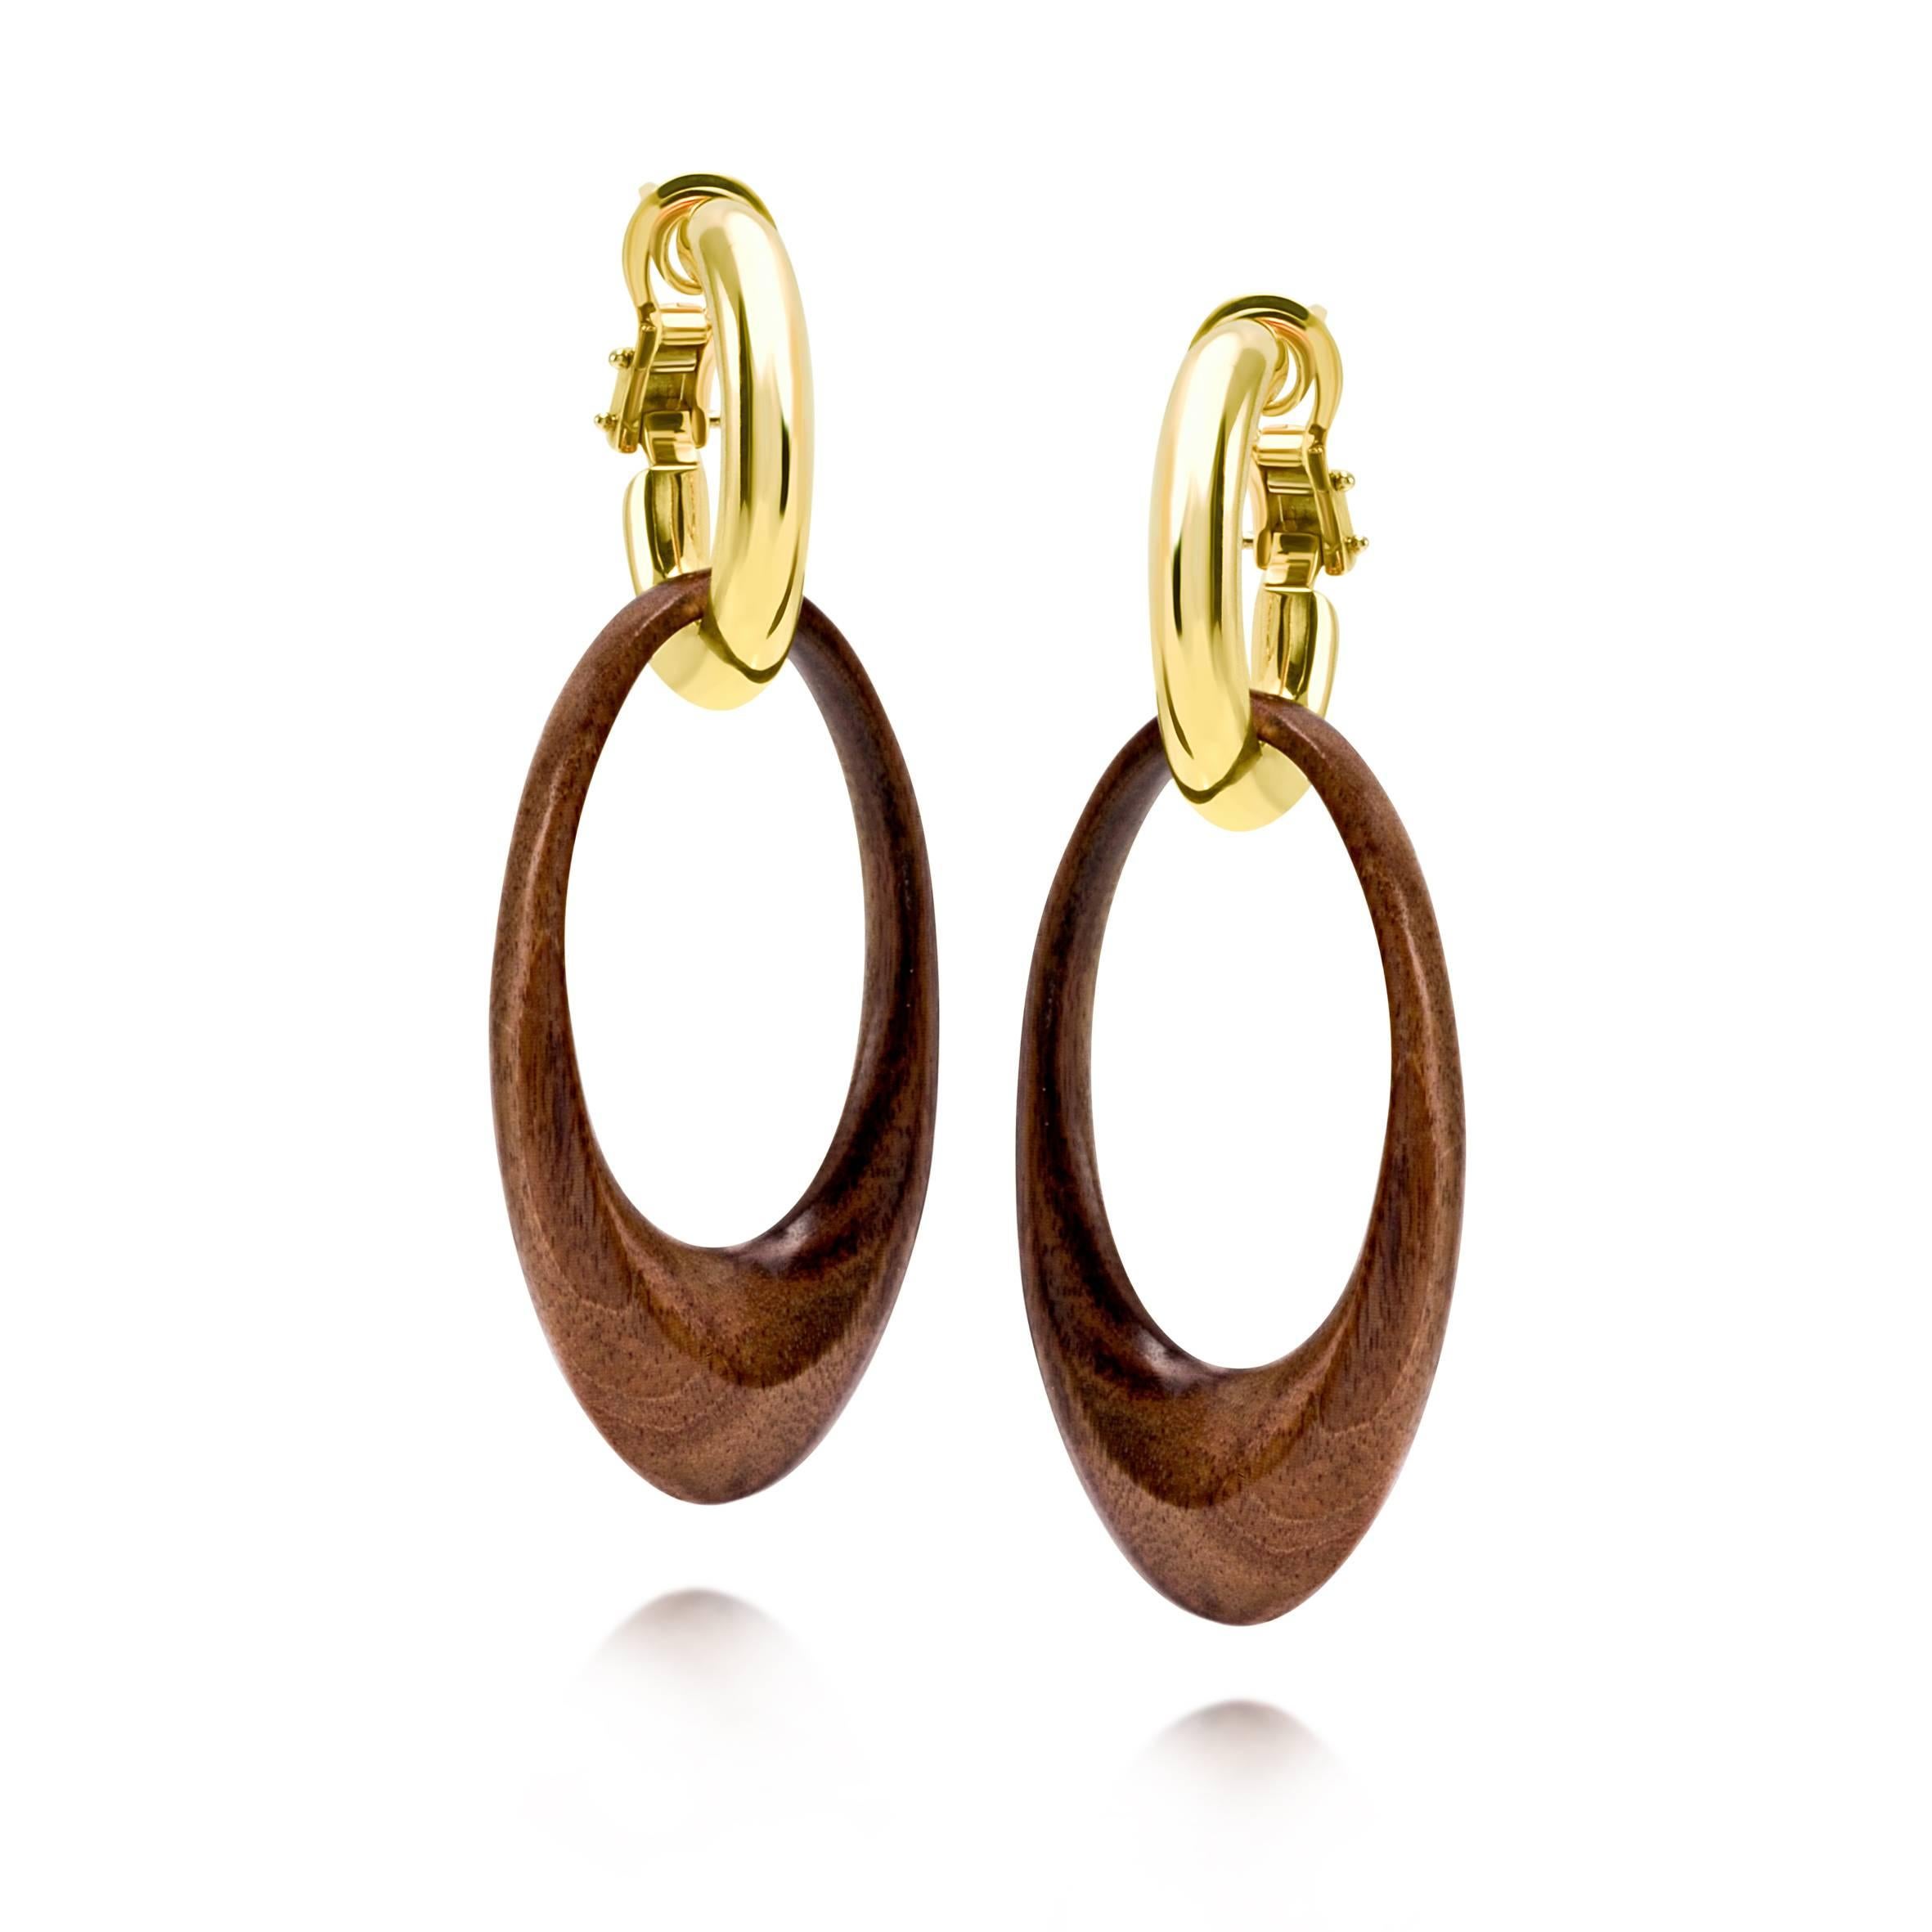 Roberta collection pair of earrings in 18 kt yellow gold  and rosewood  
The newest and more popular collection of his year

the total weight of the gold is  gr 7.10

STAMP: 10 MI ITALY 750
